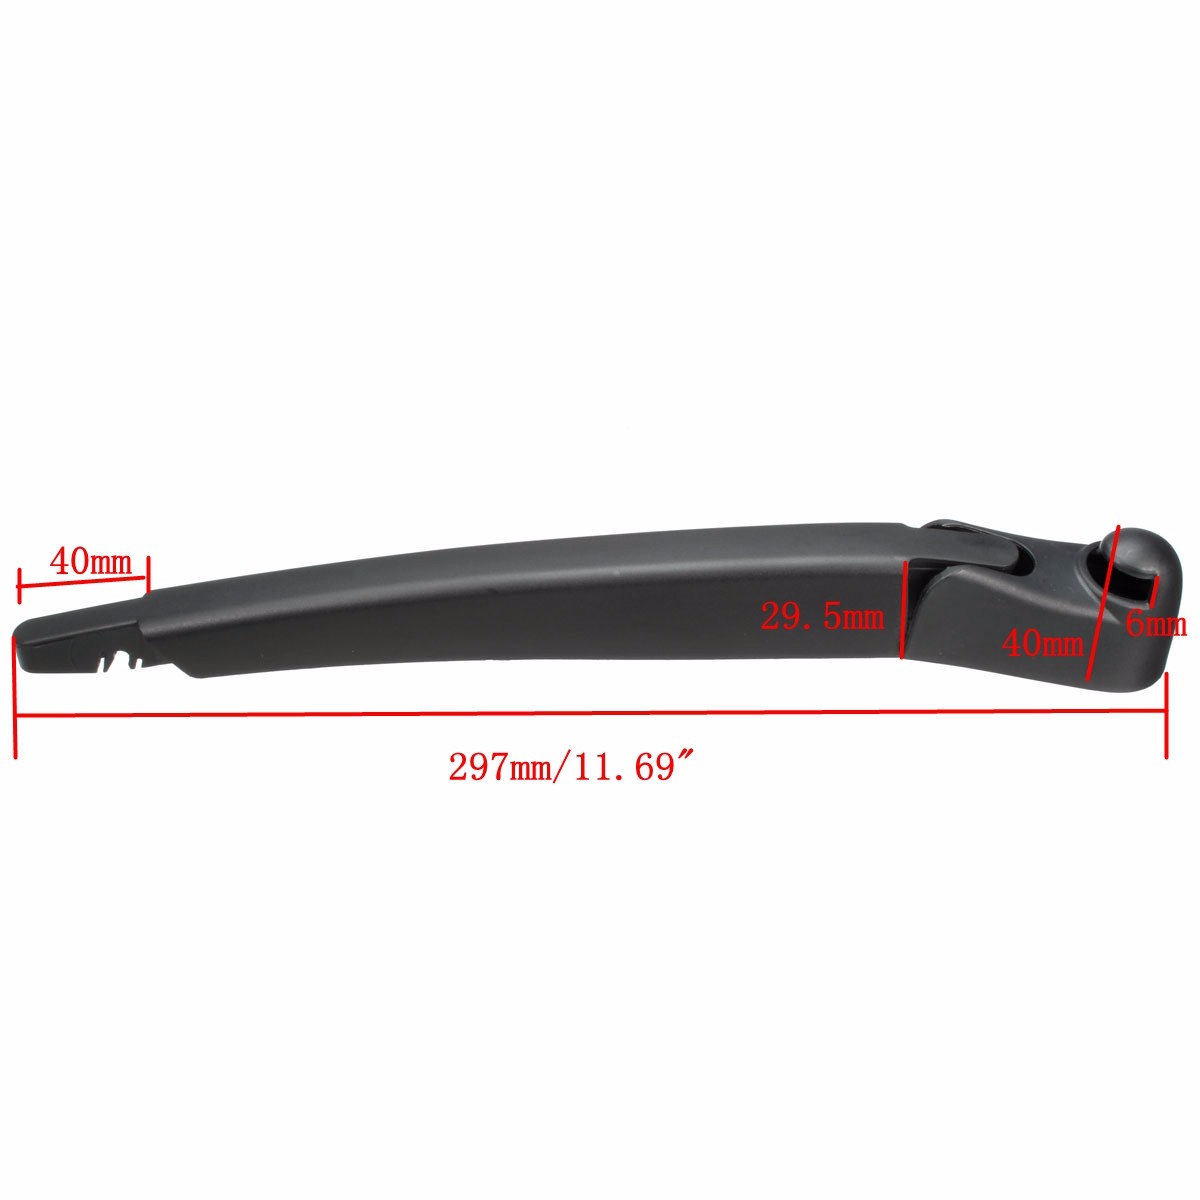 FOR MINI COOPER ONE R56 2006-2013 ONWARDS SPECIFIC FIT REAR WIPER BLADE AN